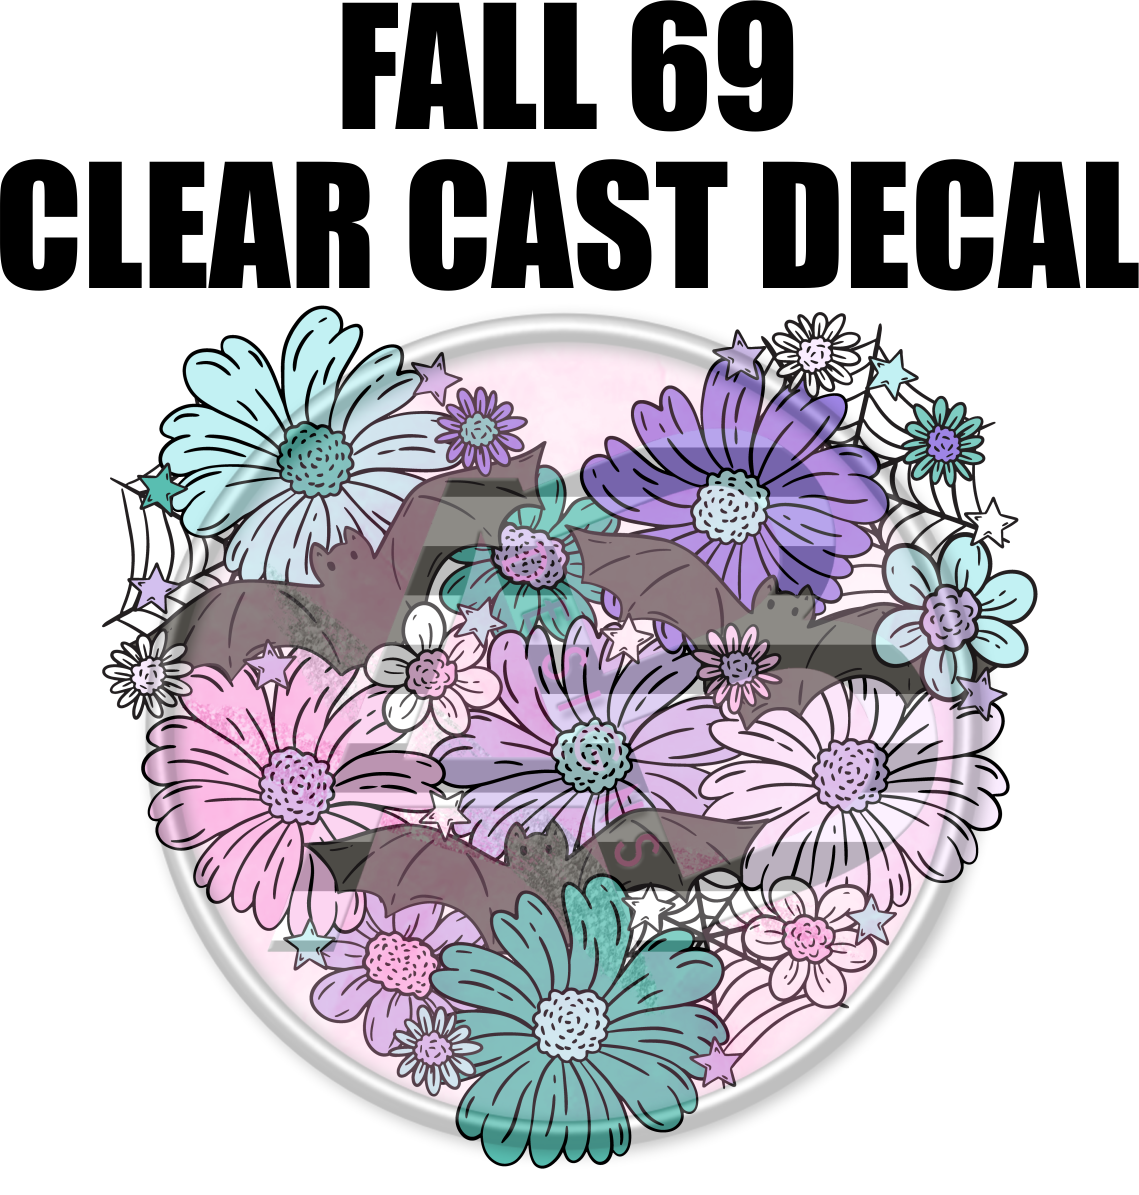 Fall 69 - Clear Cast Decal